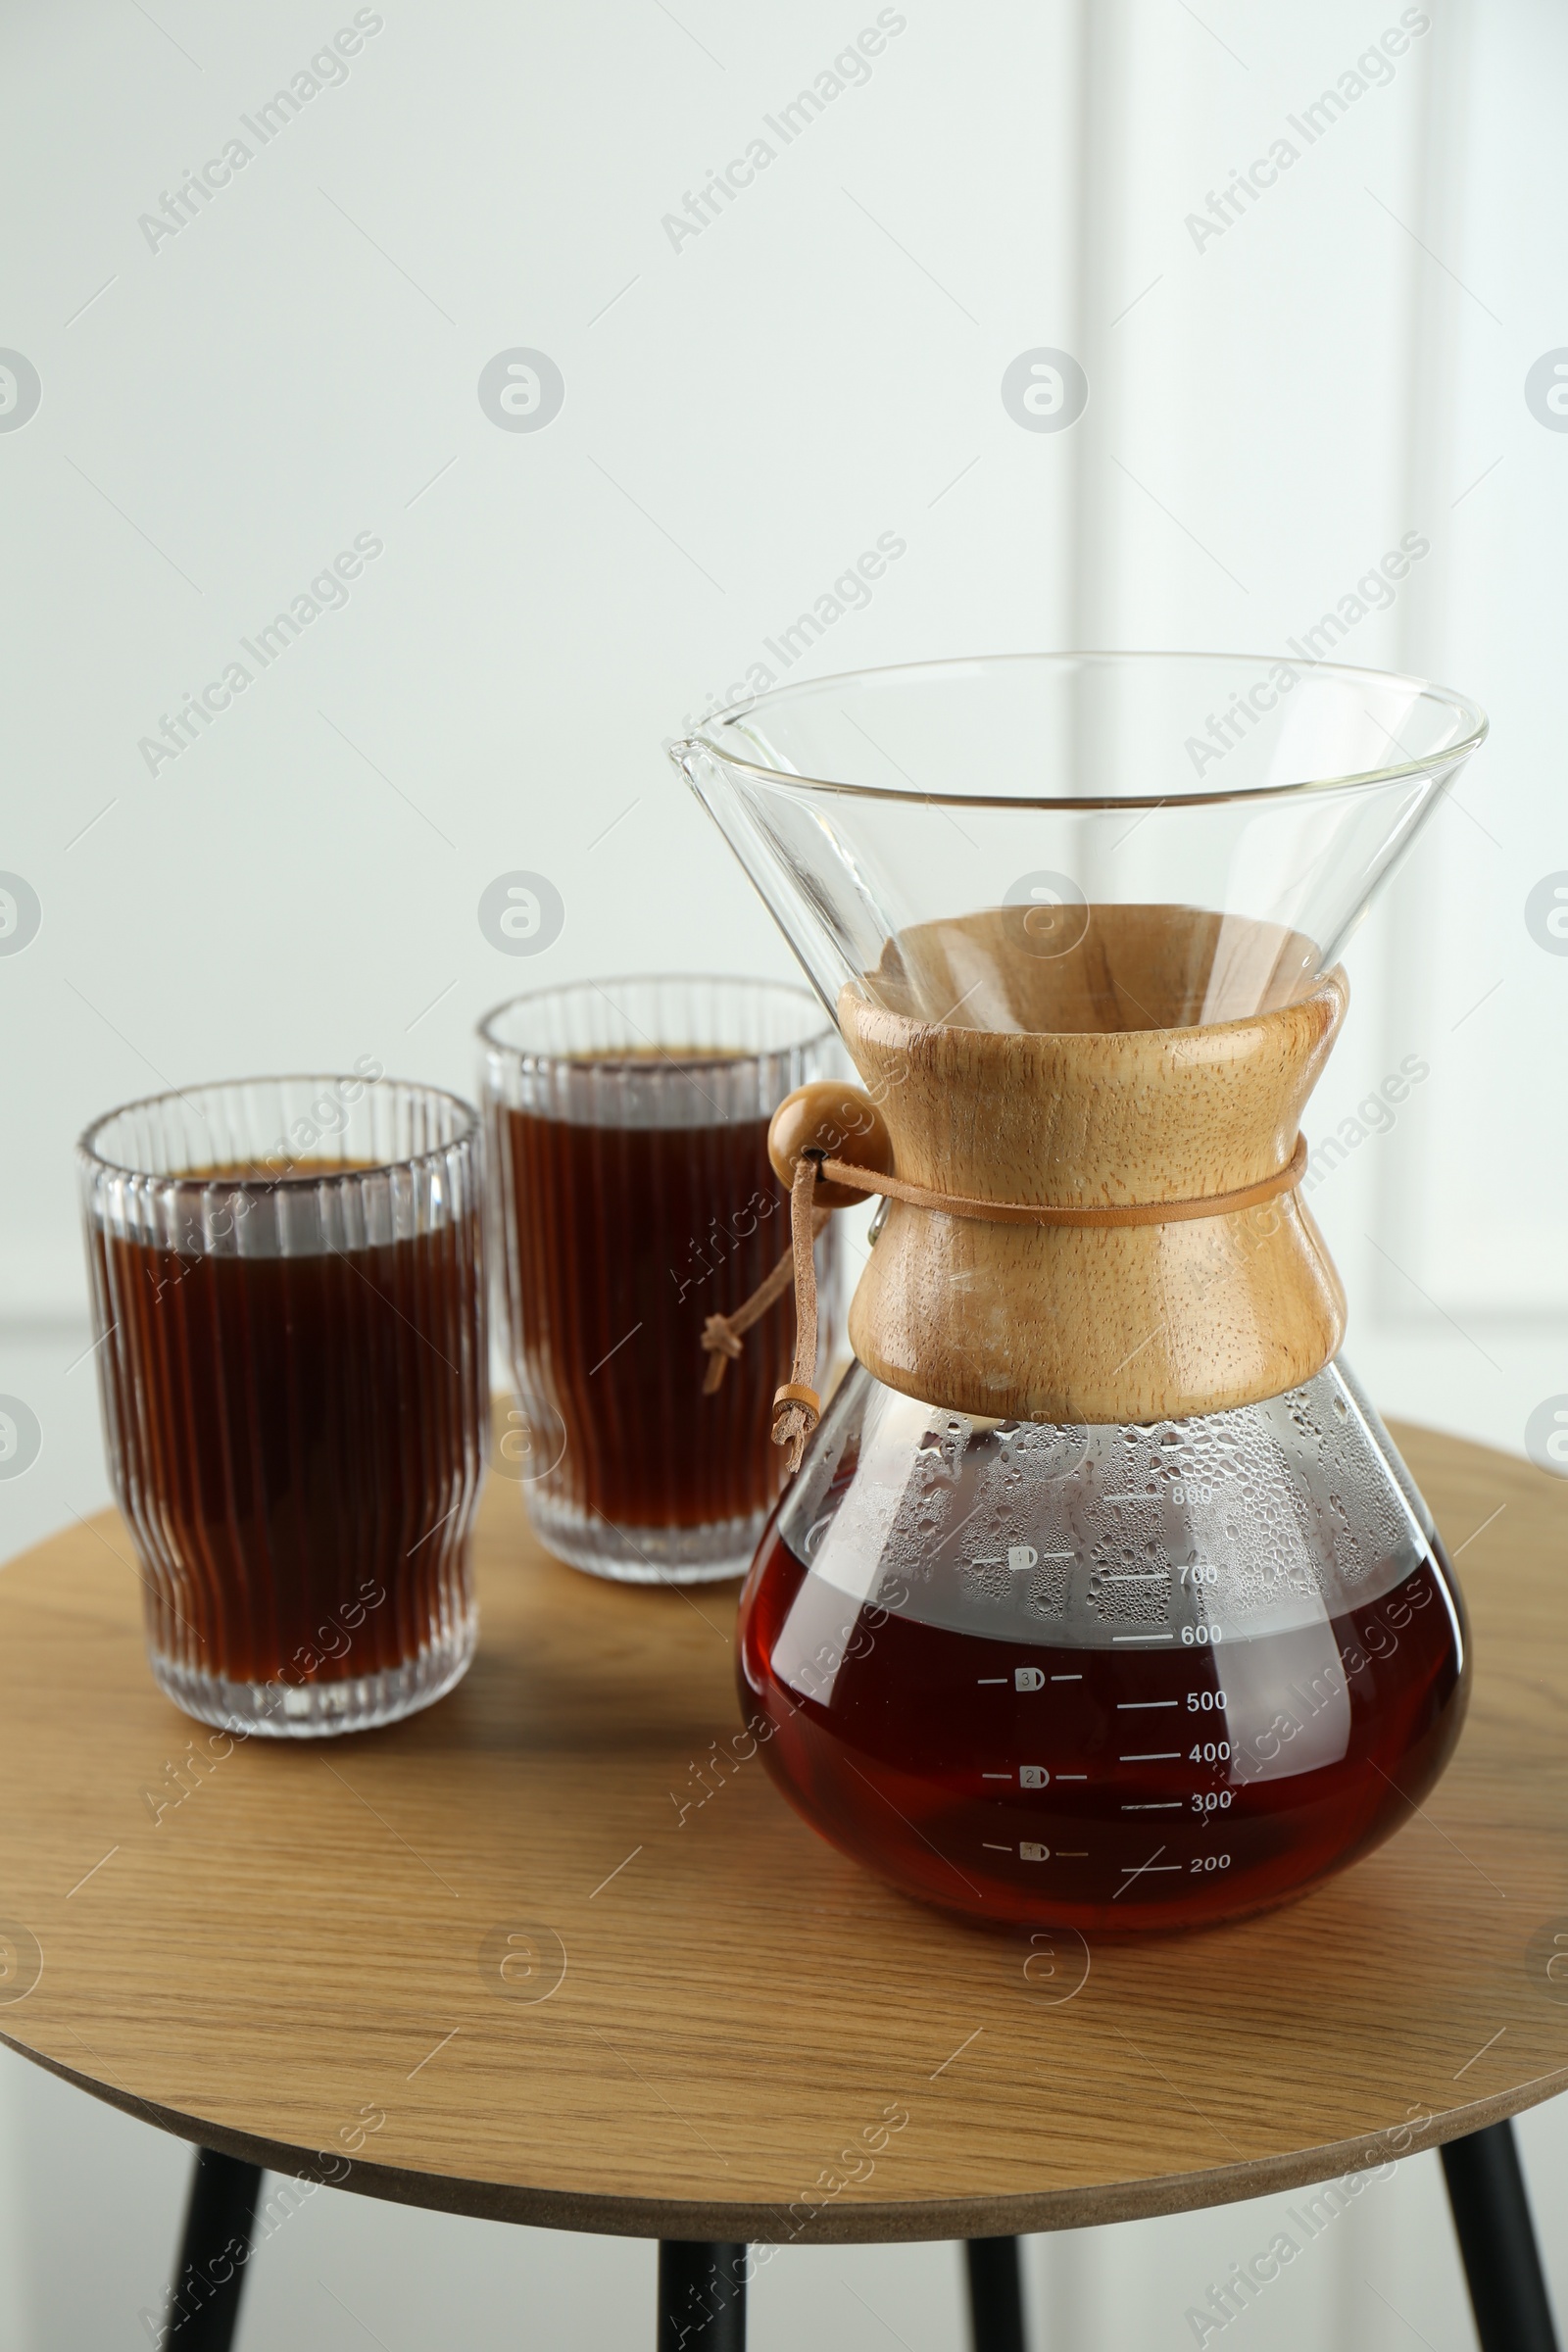 Photo of Glass chemex coffeemaker and glasses of coffee on wooden table against white wall